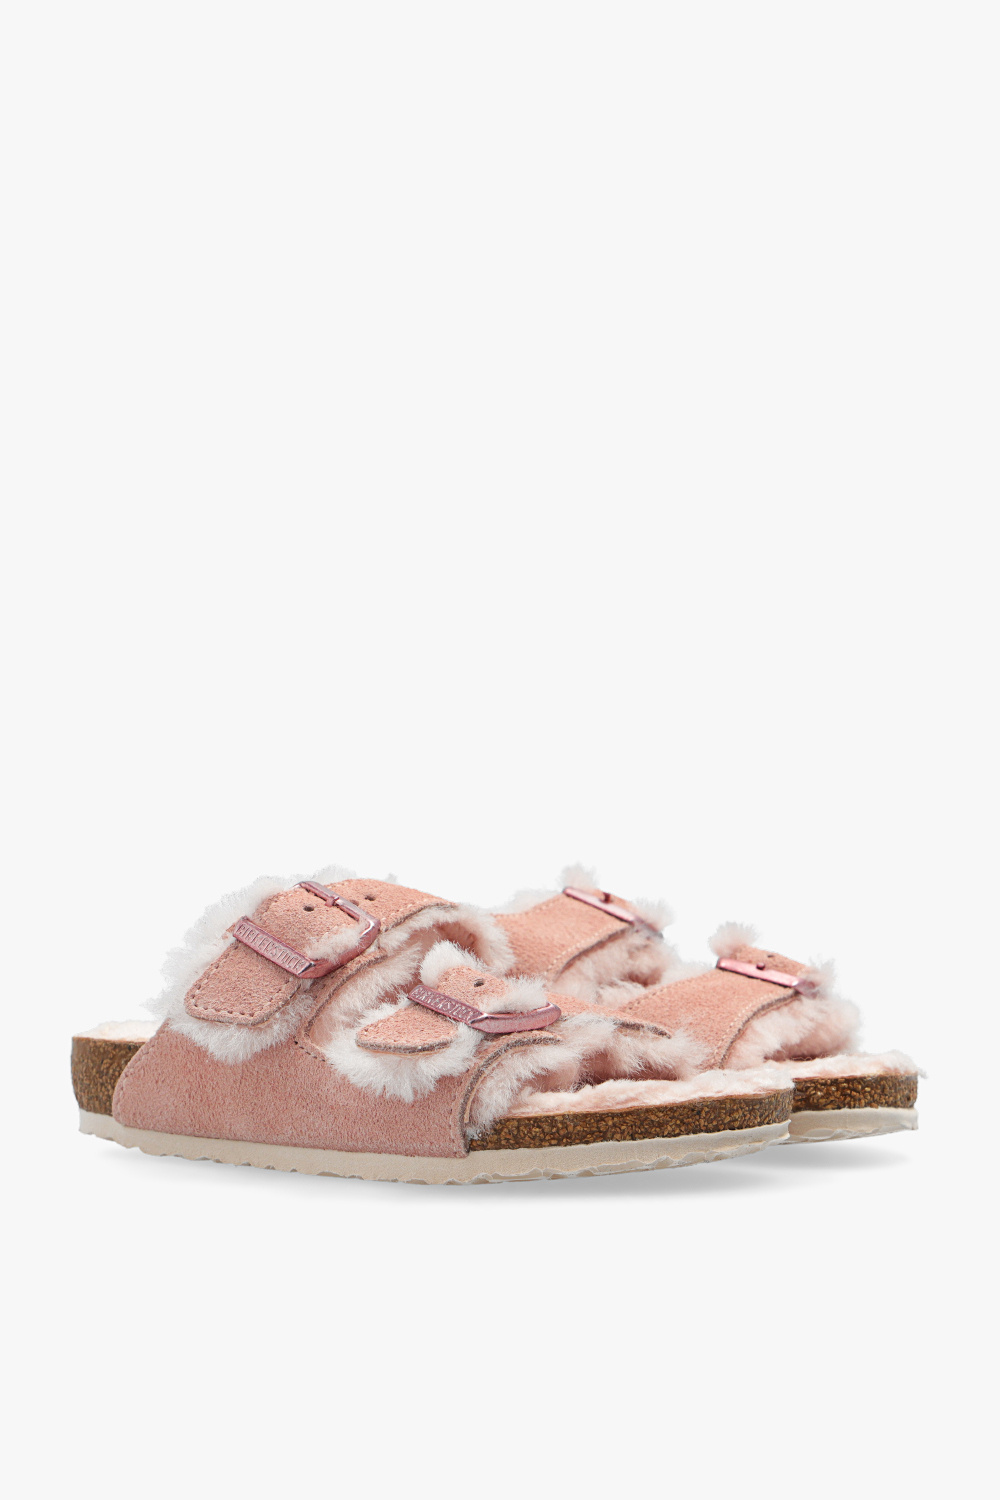 Arizona Shearling Suede Leather Light Rose